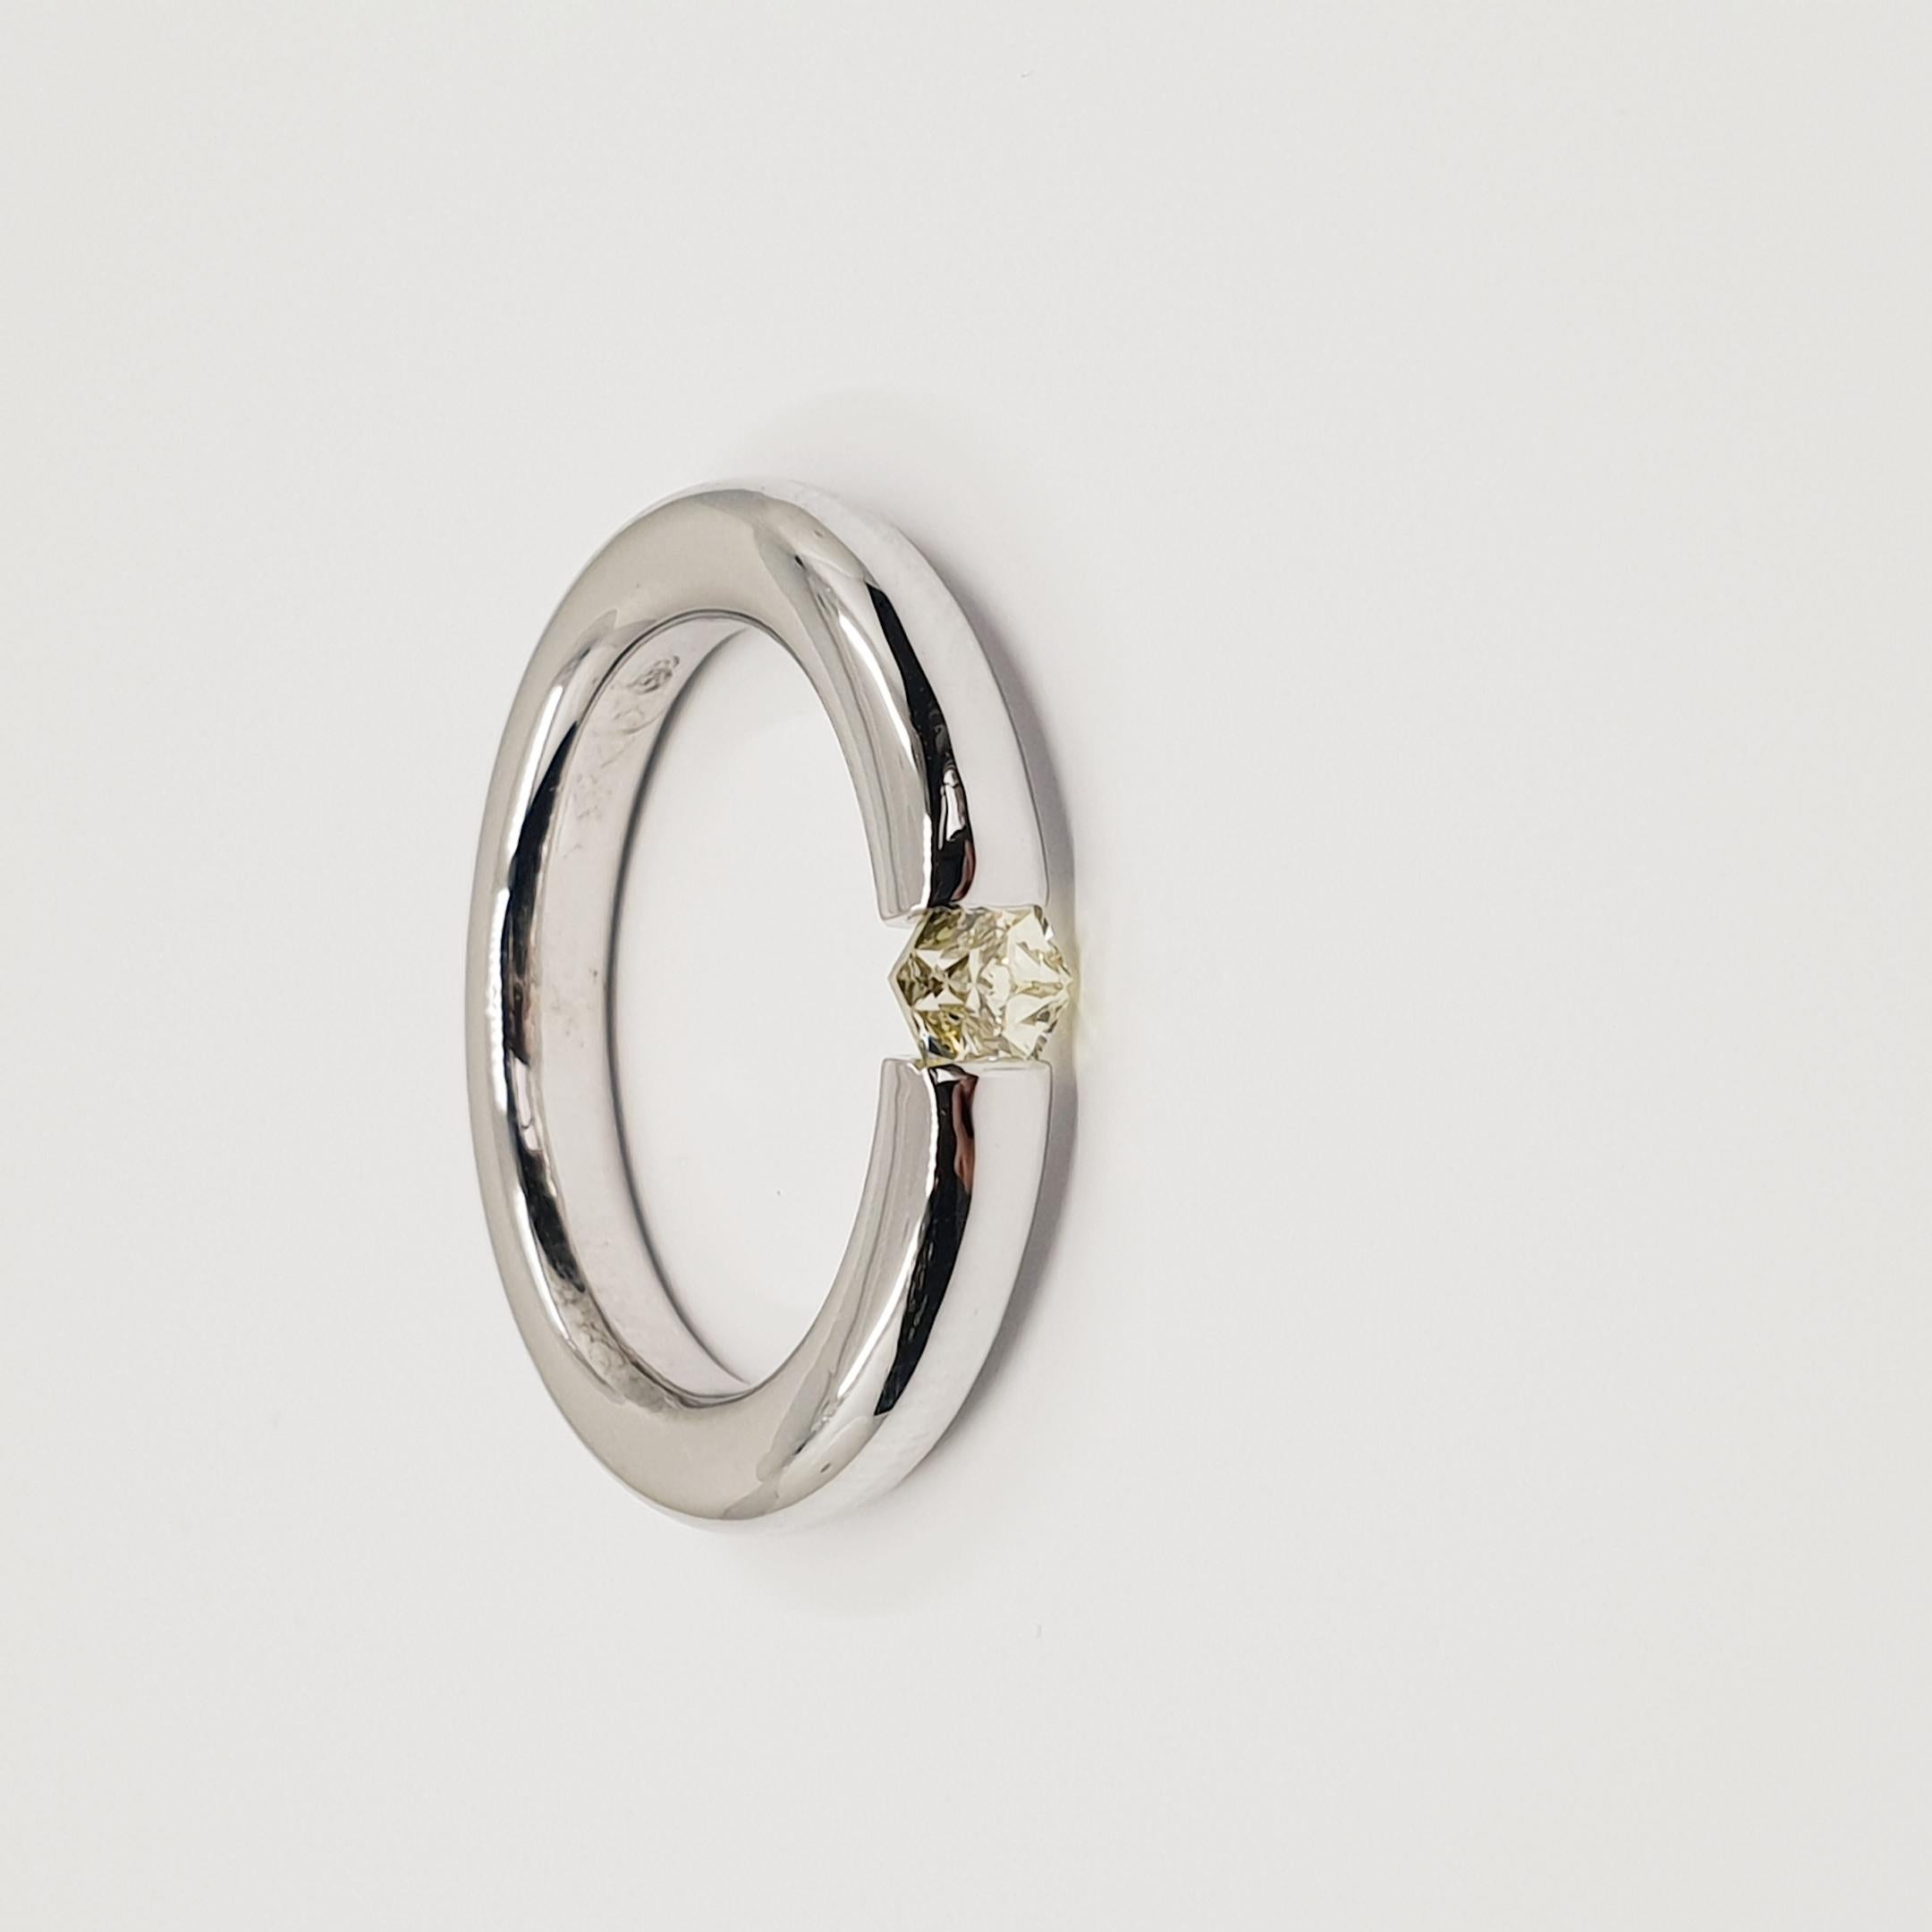 0.5 Carat Solitaire Diamond Ring F-G/VS 18k White Gold, Brilliant Cut Diamond. 
Fine Piece of High Jewelry whith a total of 0.5 Carat. 
Hand Made Tension Ring with 